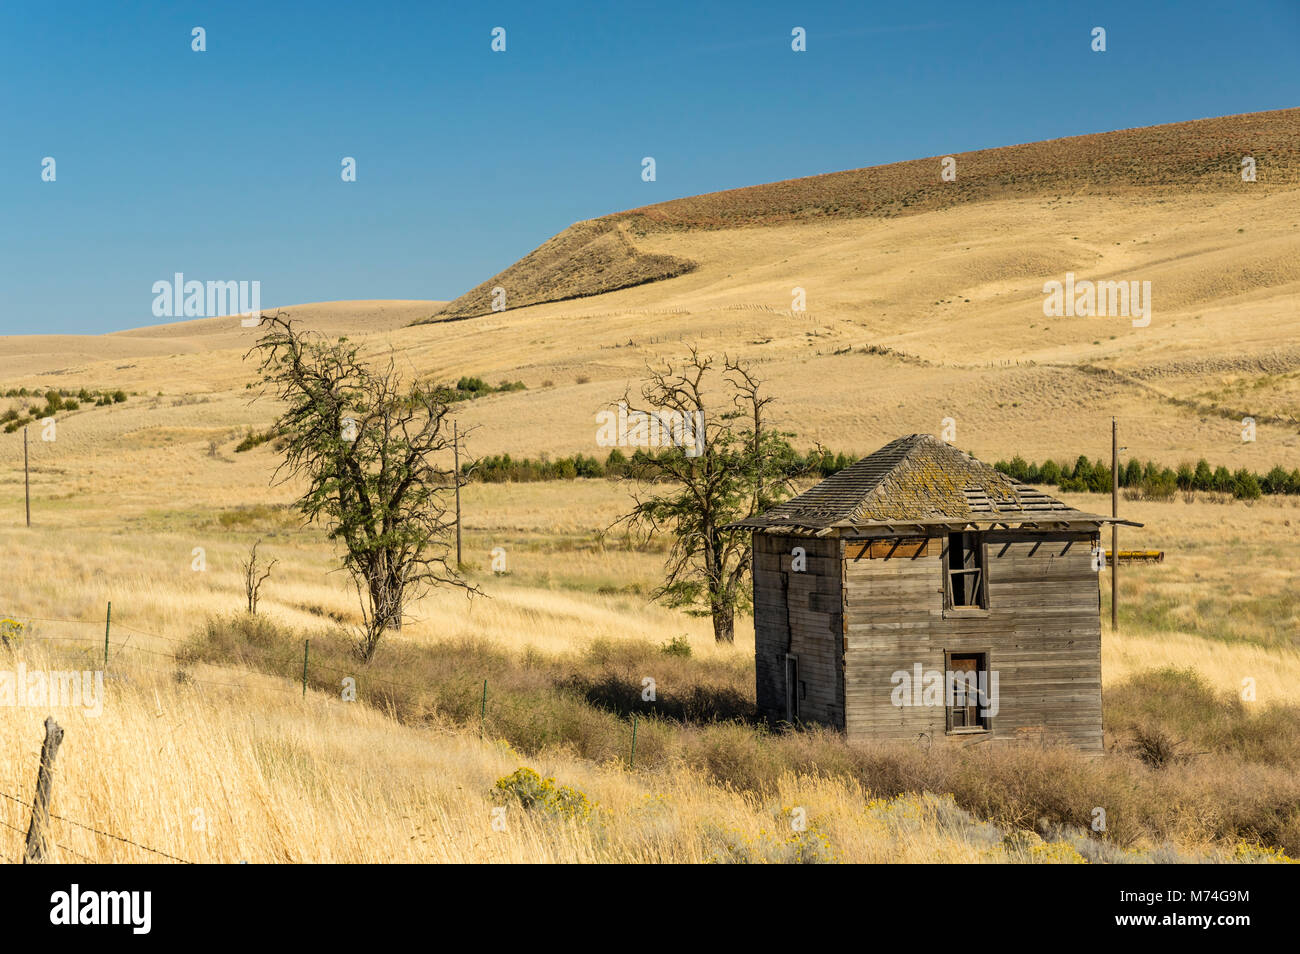 Abandoned building on a ranch in eastern Washington with dry praire in the background Stock Photo